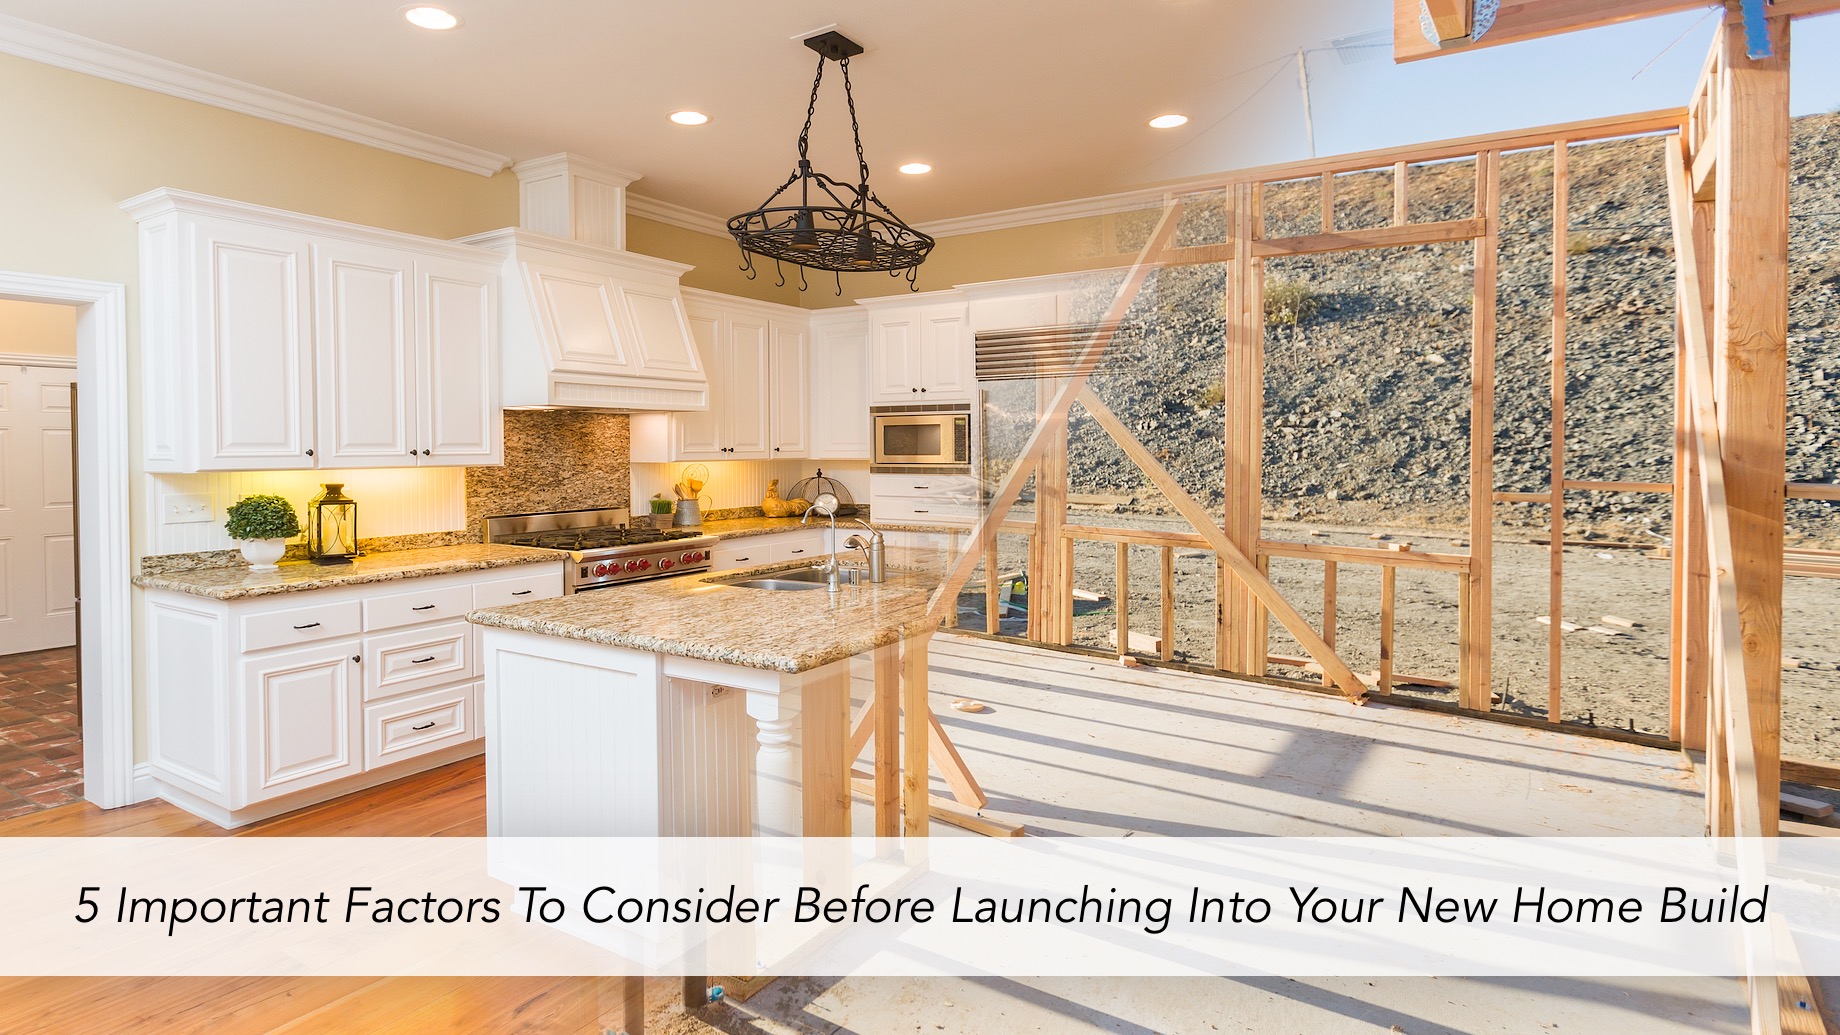 5 Important Factors To Consider Before Launching Into Your New Home Build